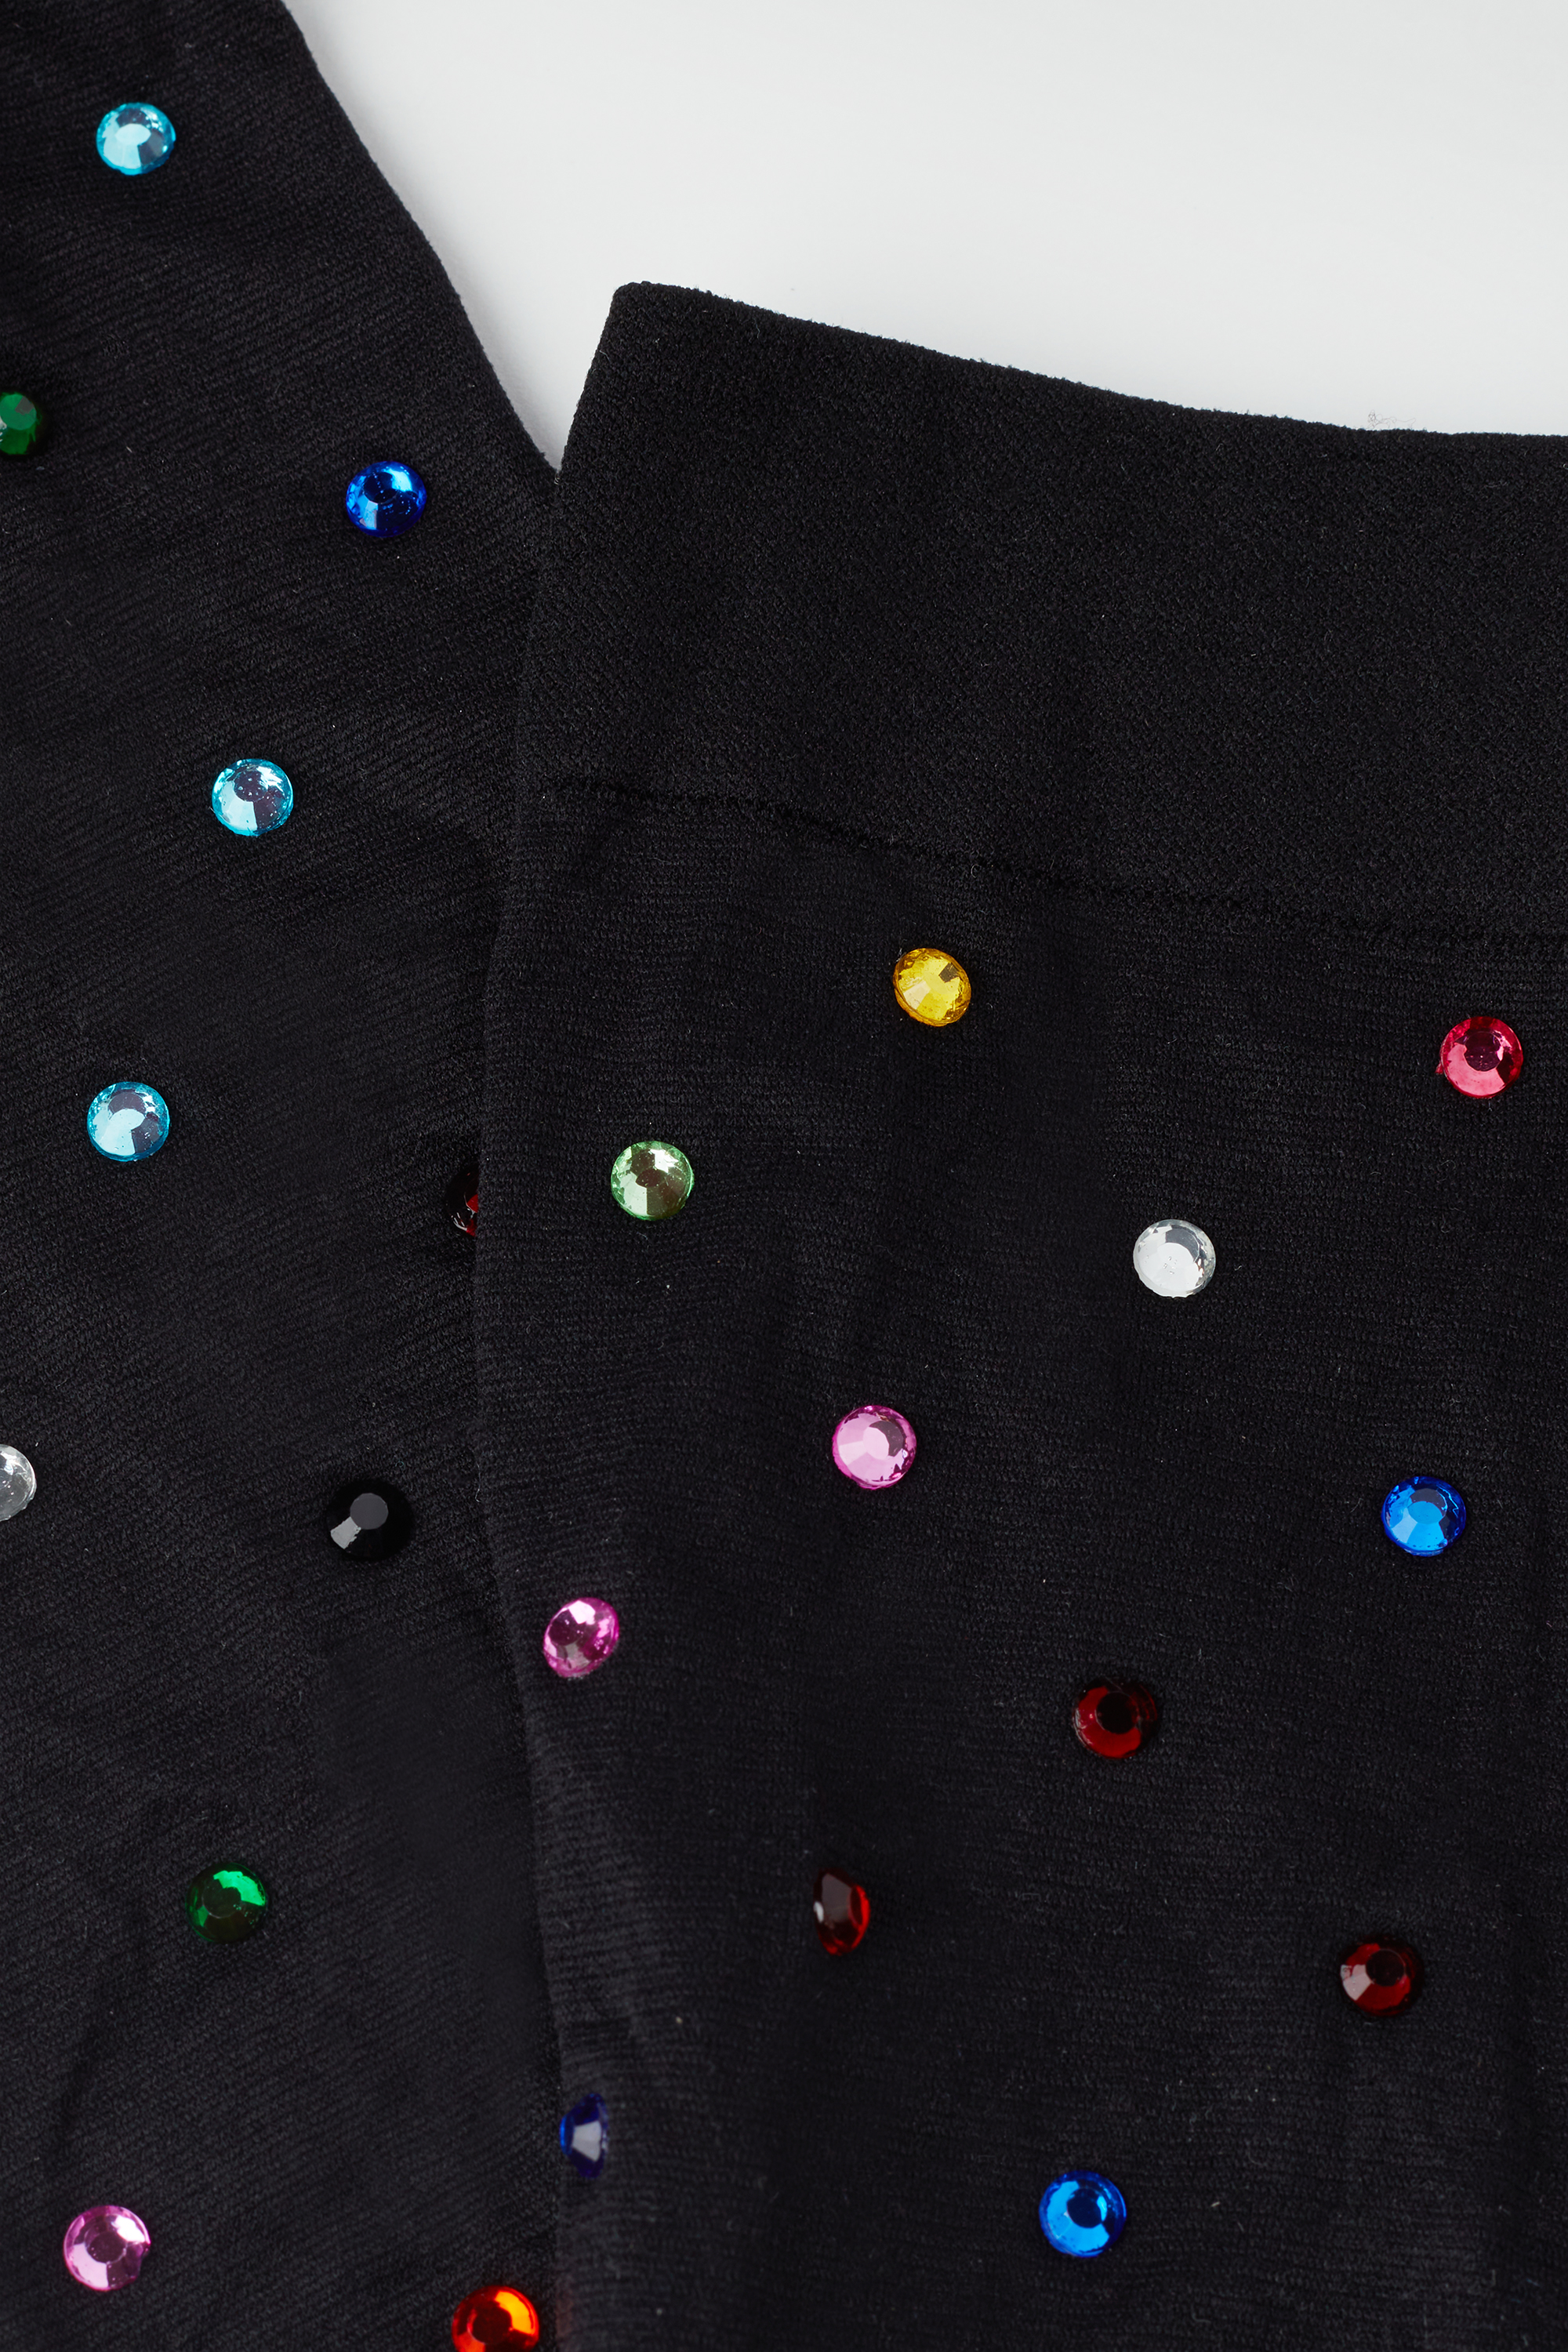 Limited Edition Stockings with Colored Rhinestones